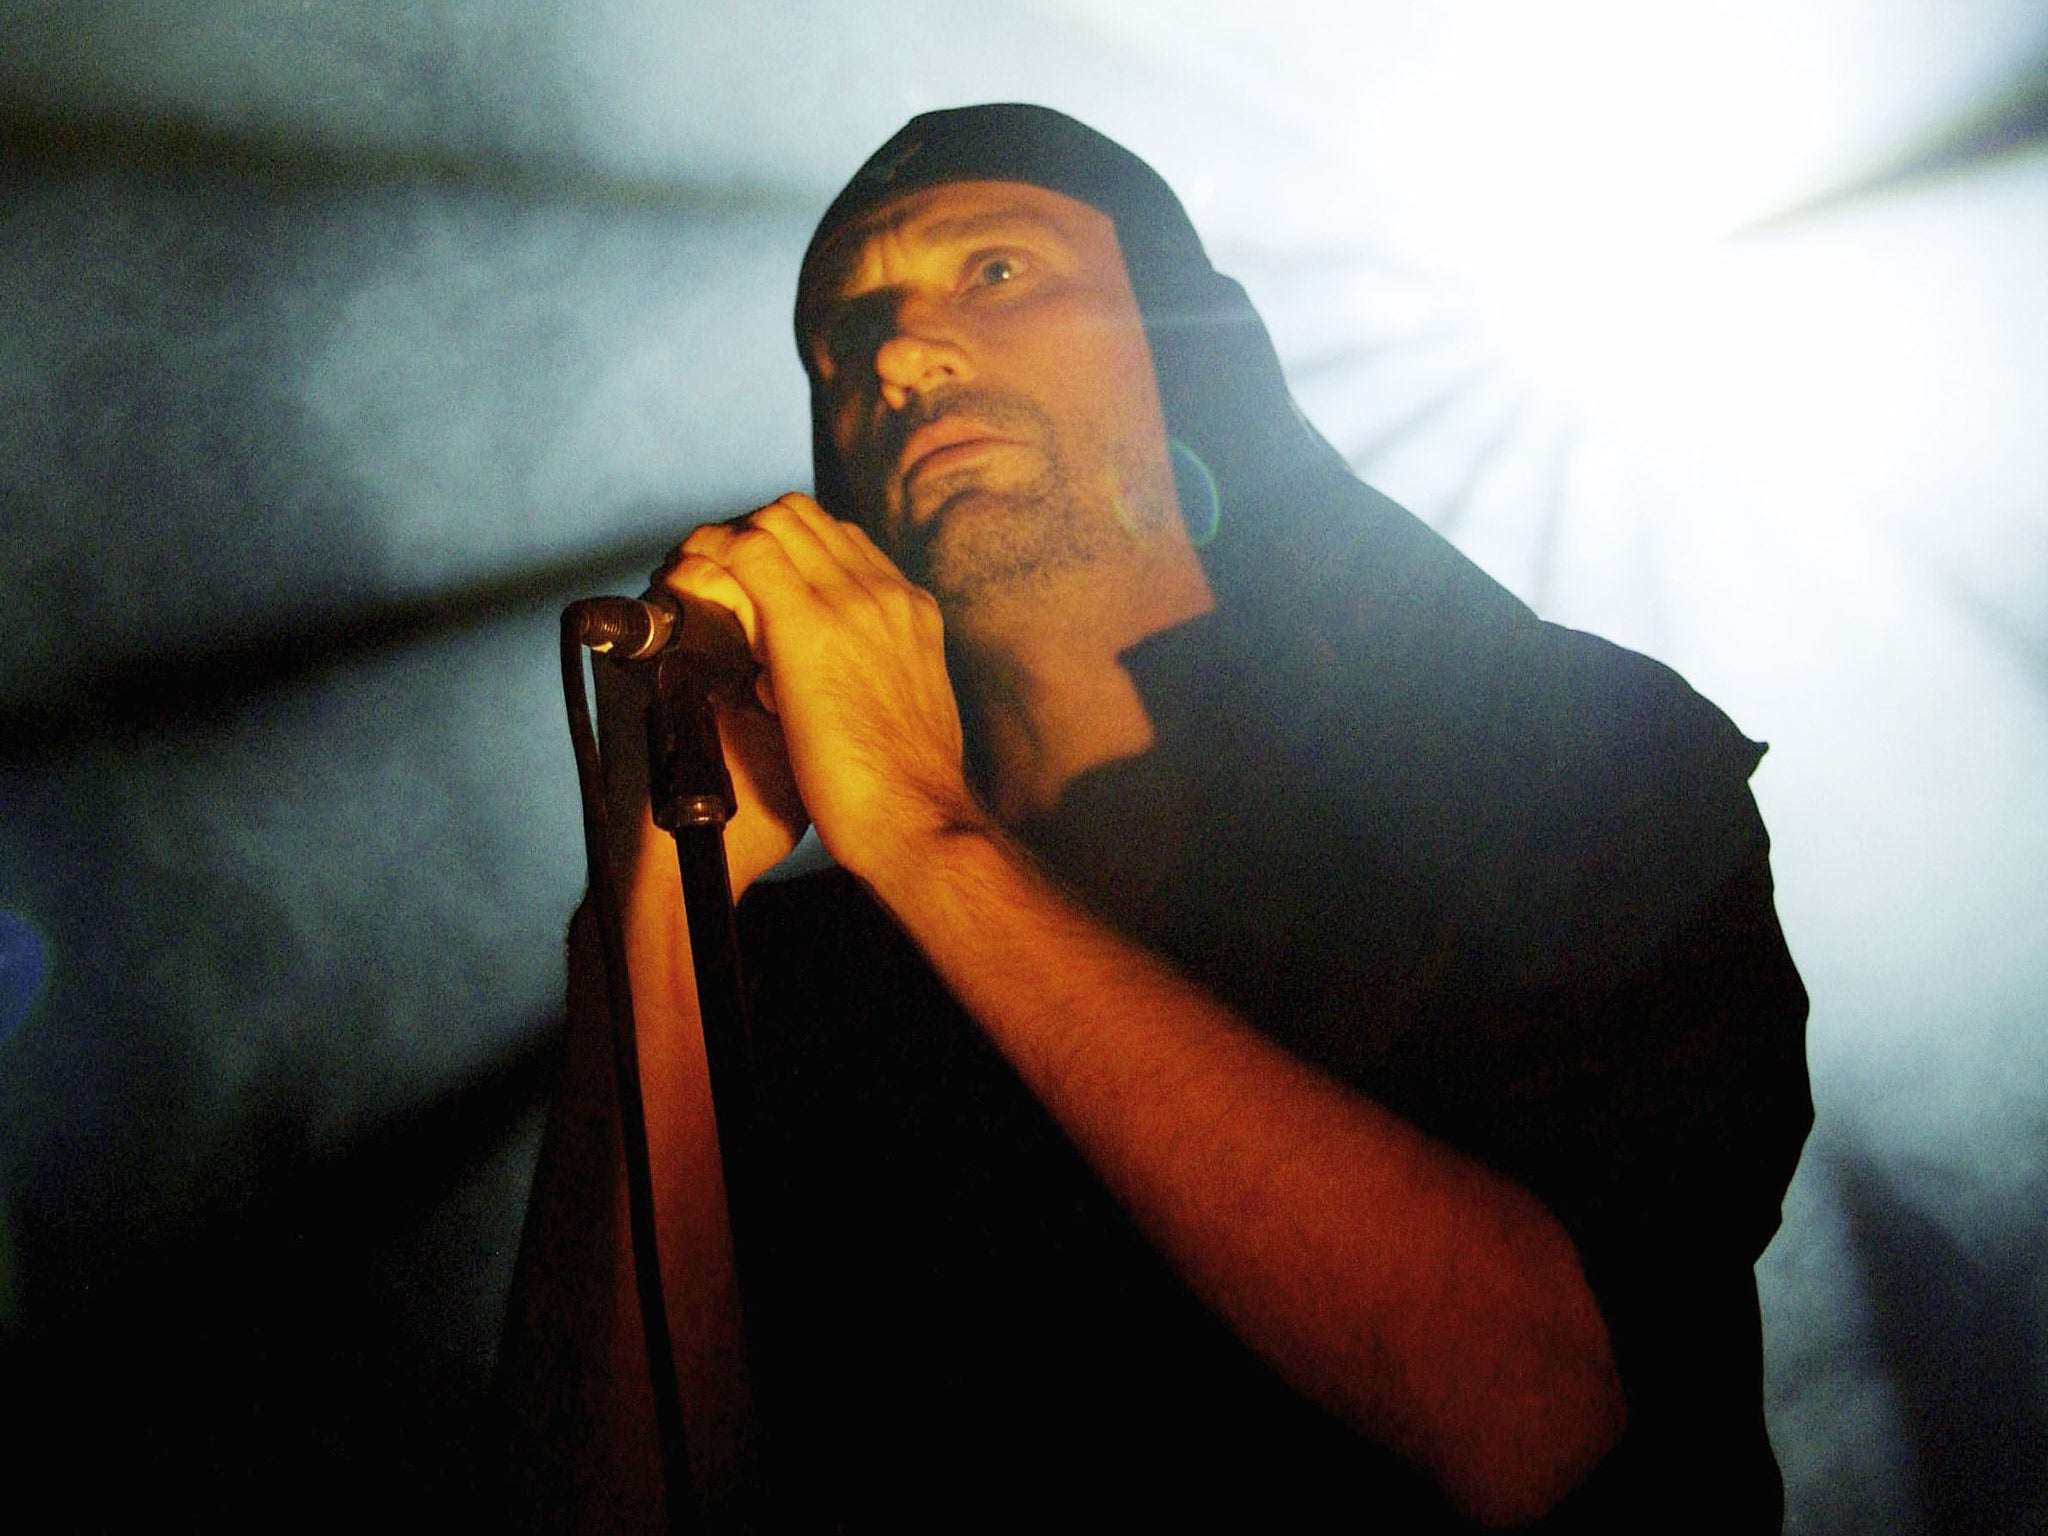 Milan Fras, lead singer of Slovenian experimental industrial group Laibach